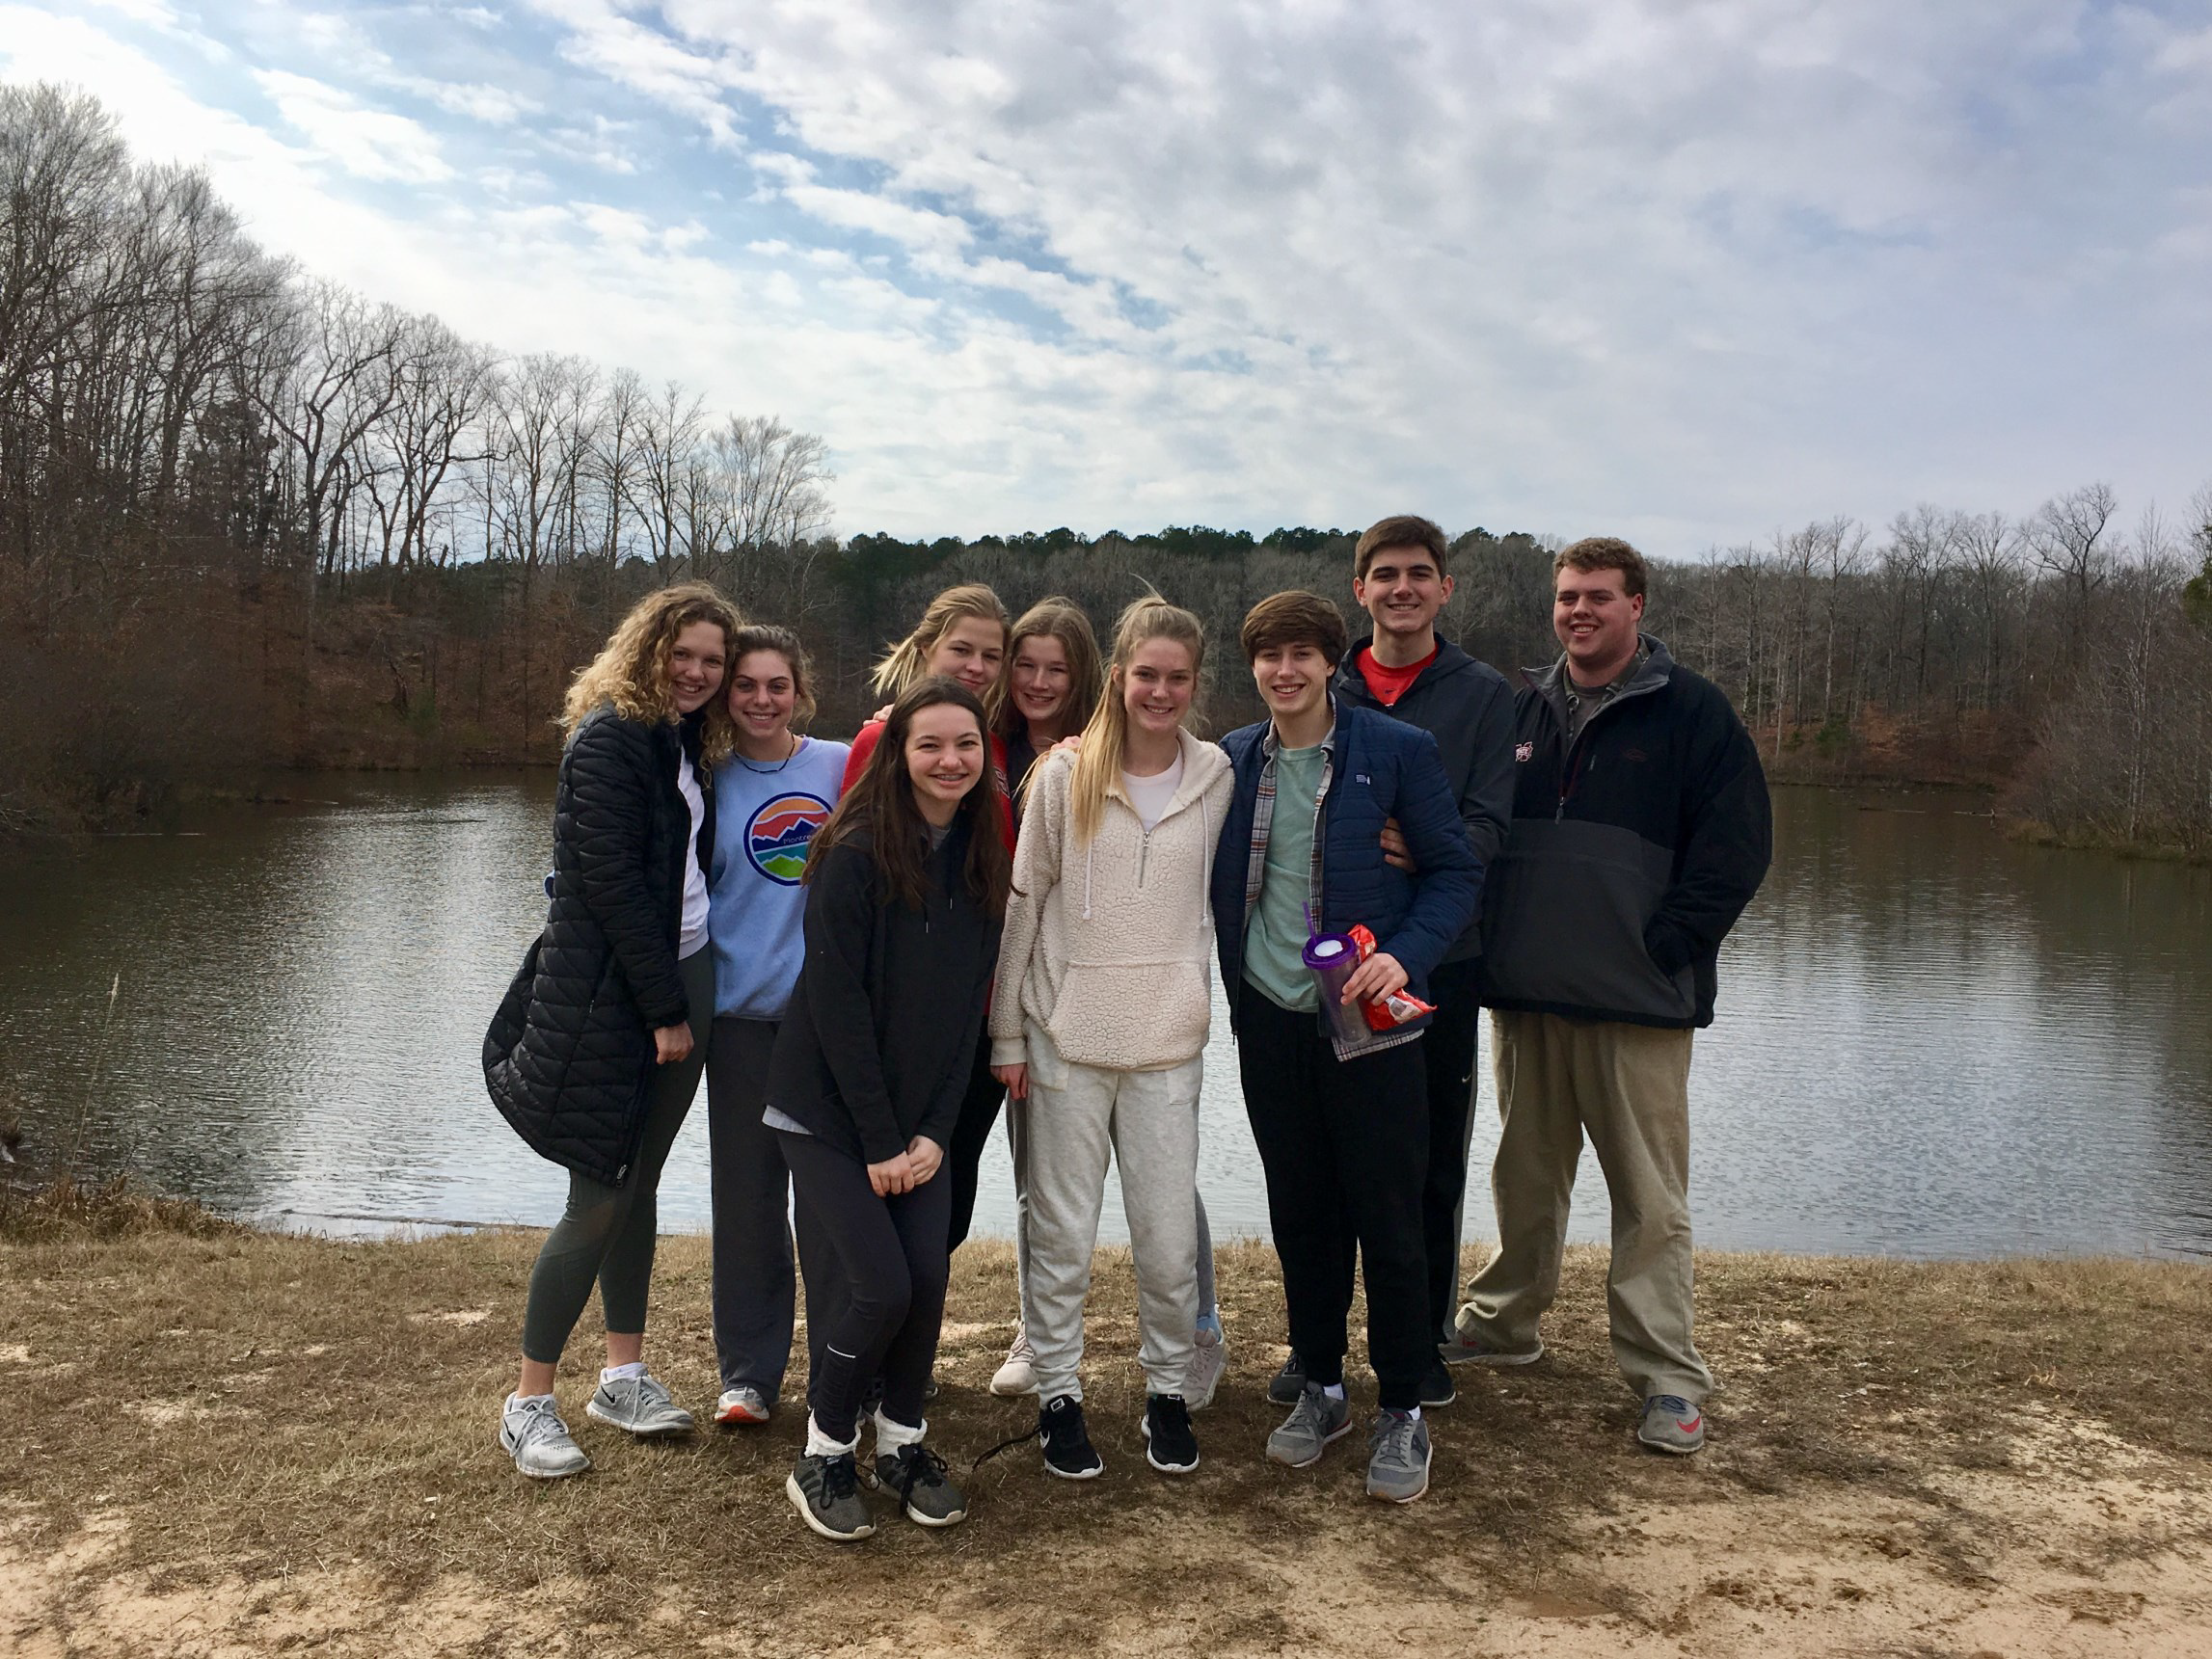 FPC SENIOR HIGH YOUTH RETREAT held at CAMP HOPEWELL January 25, 26, 27